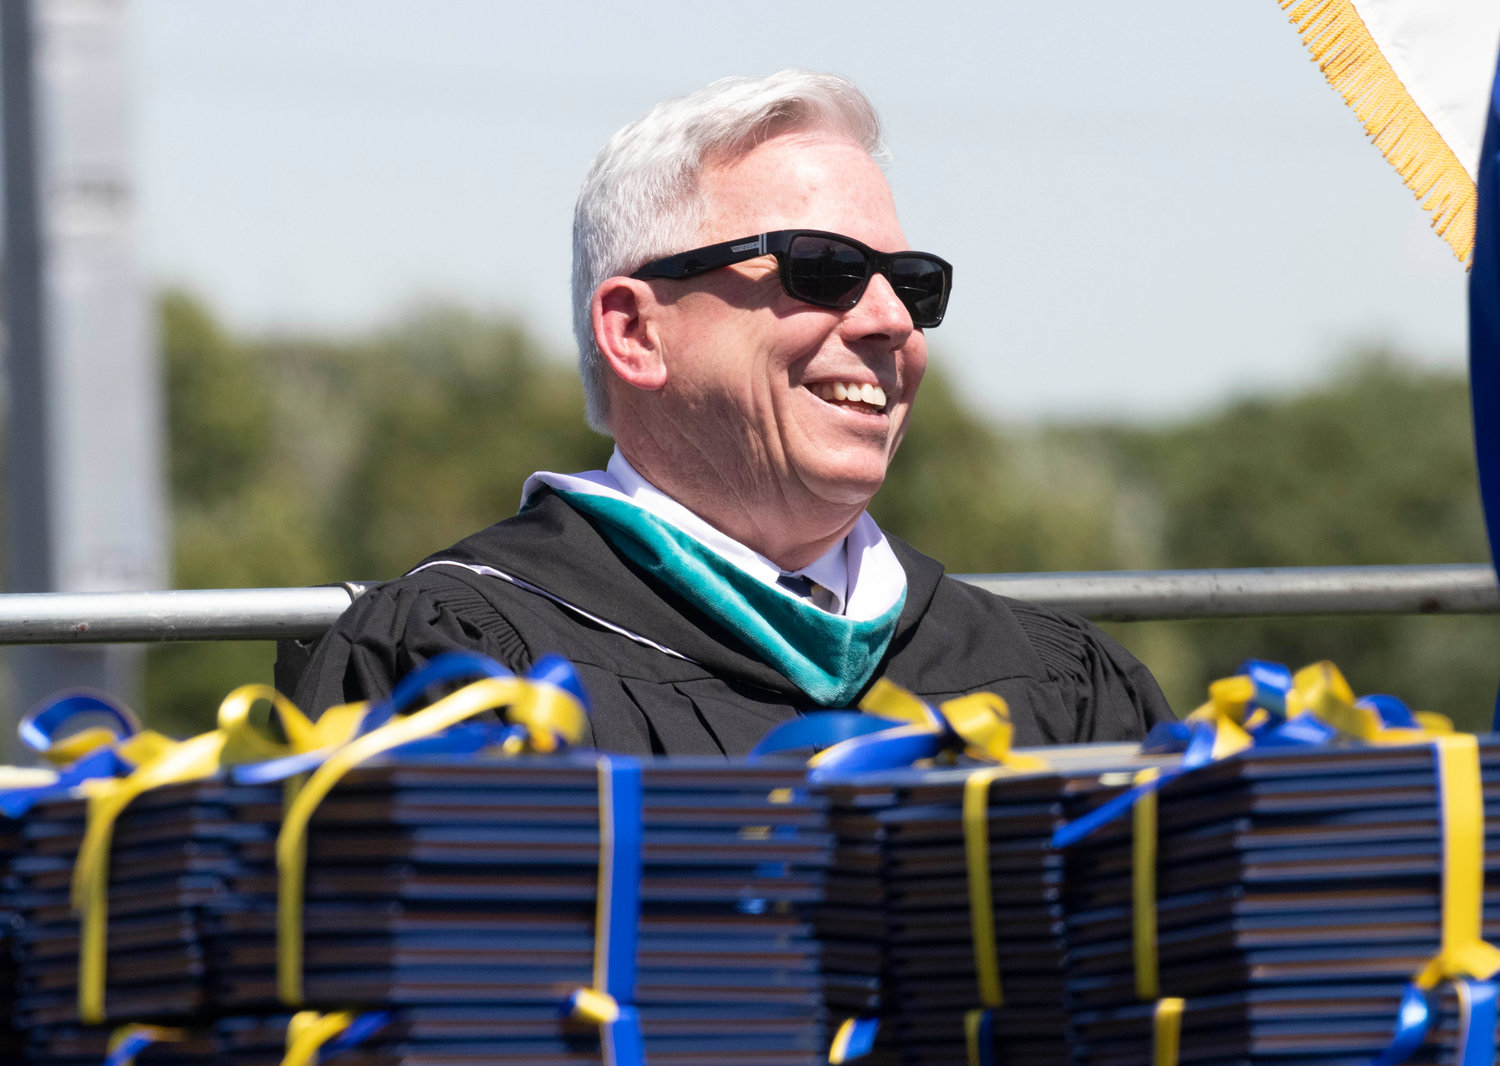 Barrington High School Principal Joe Hurley is all smiles during Sunday’s graduation ceremony. Hurley retires at the end of the year.